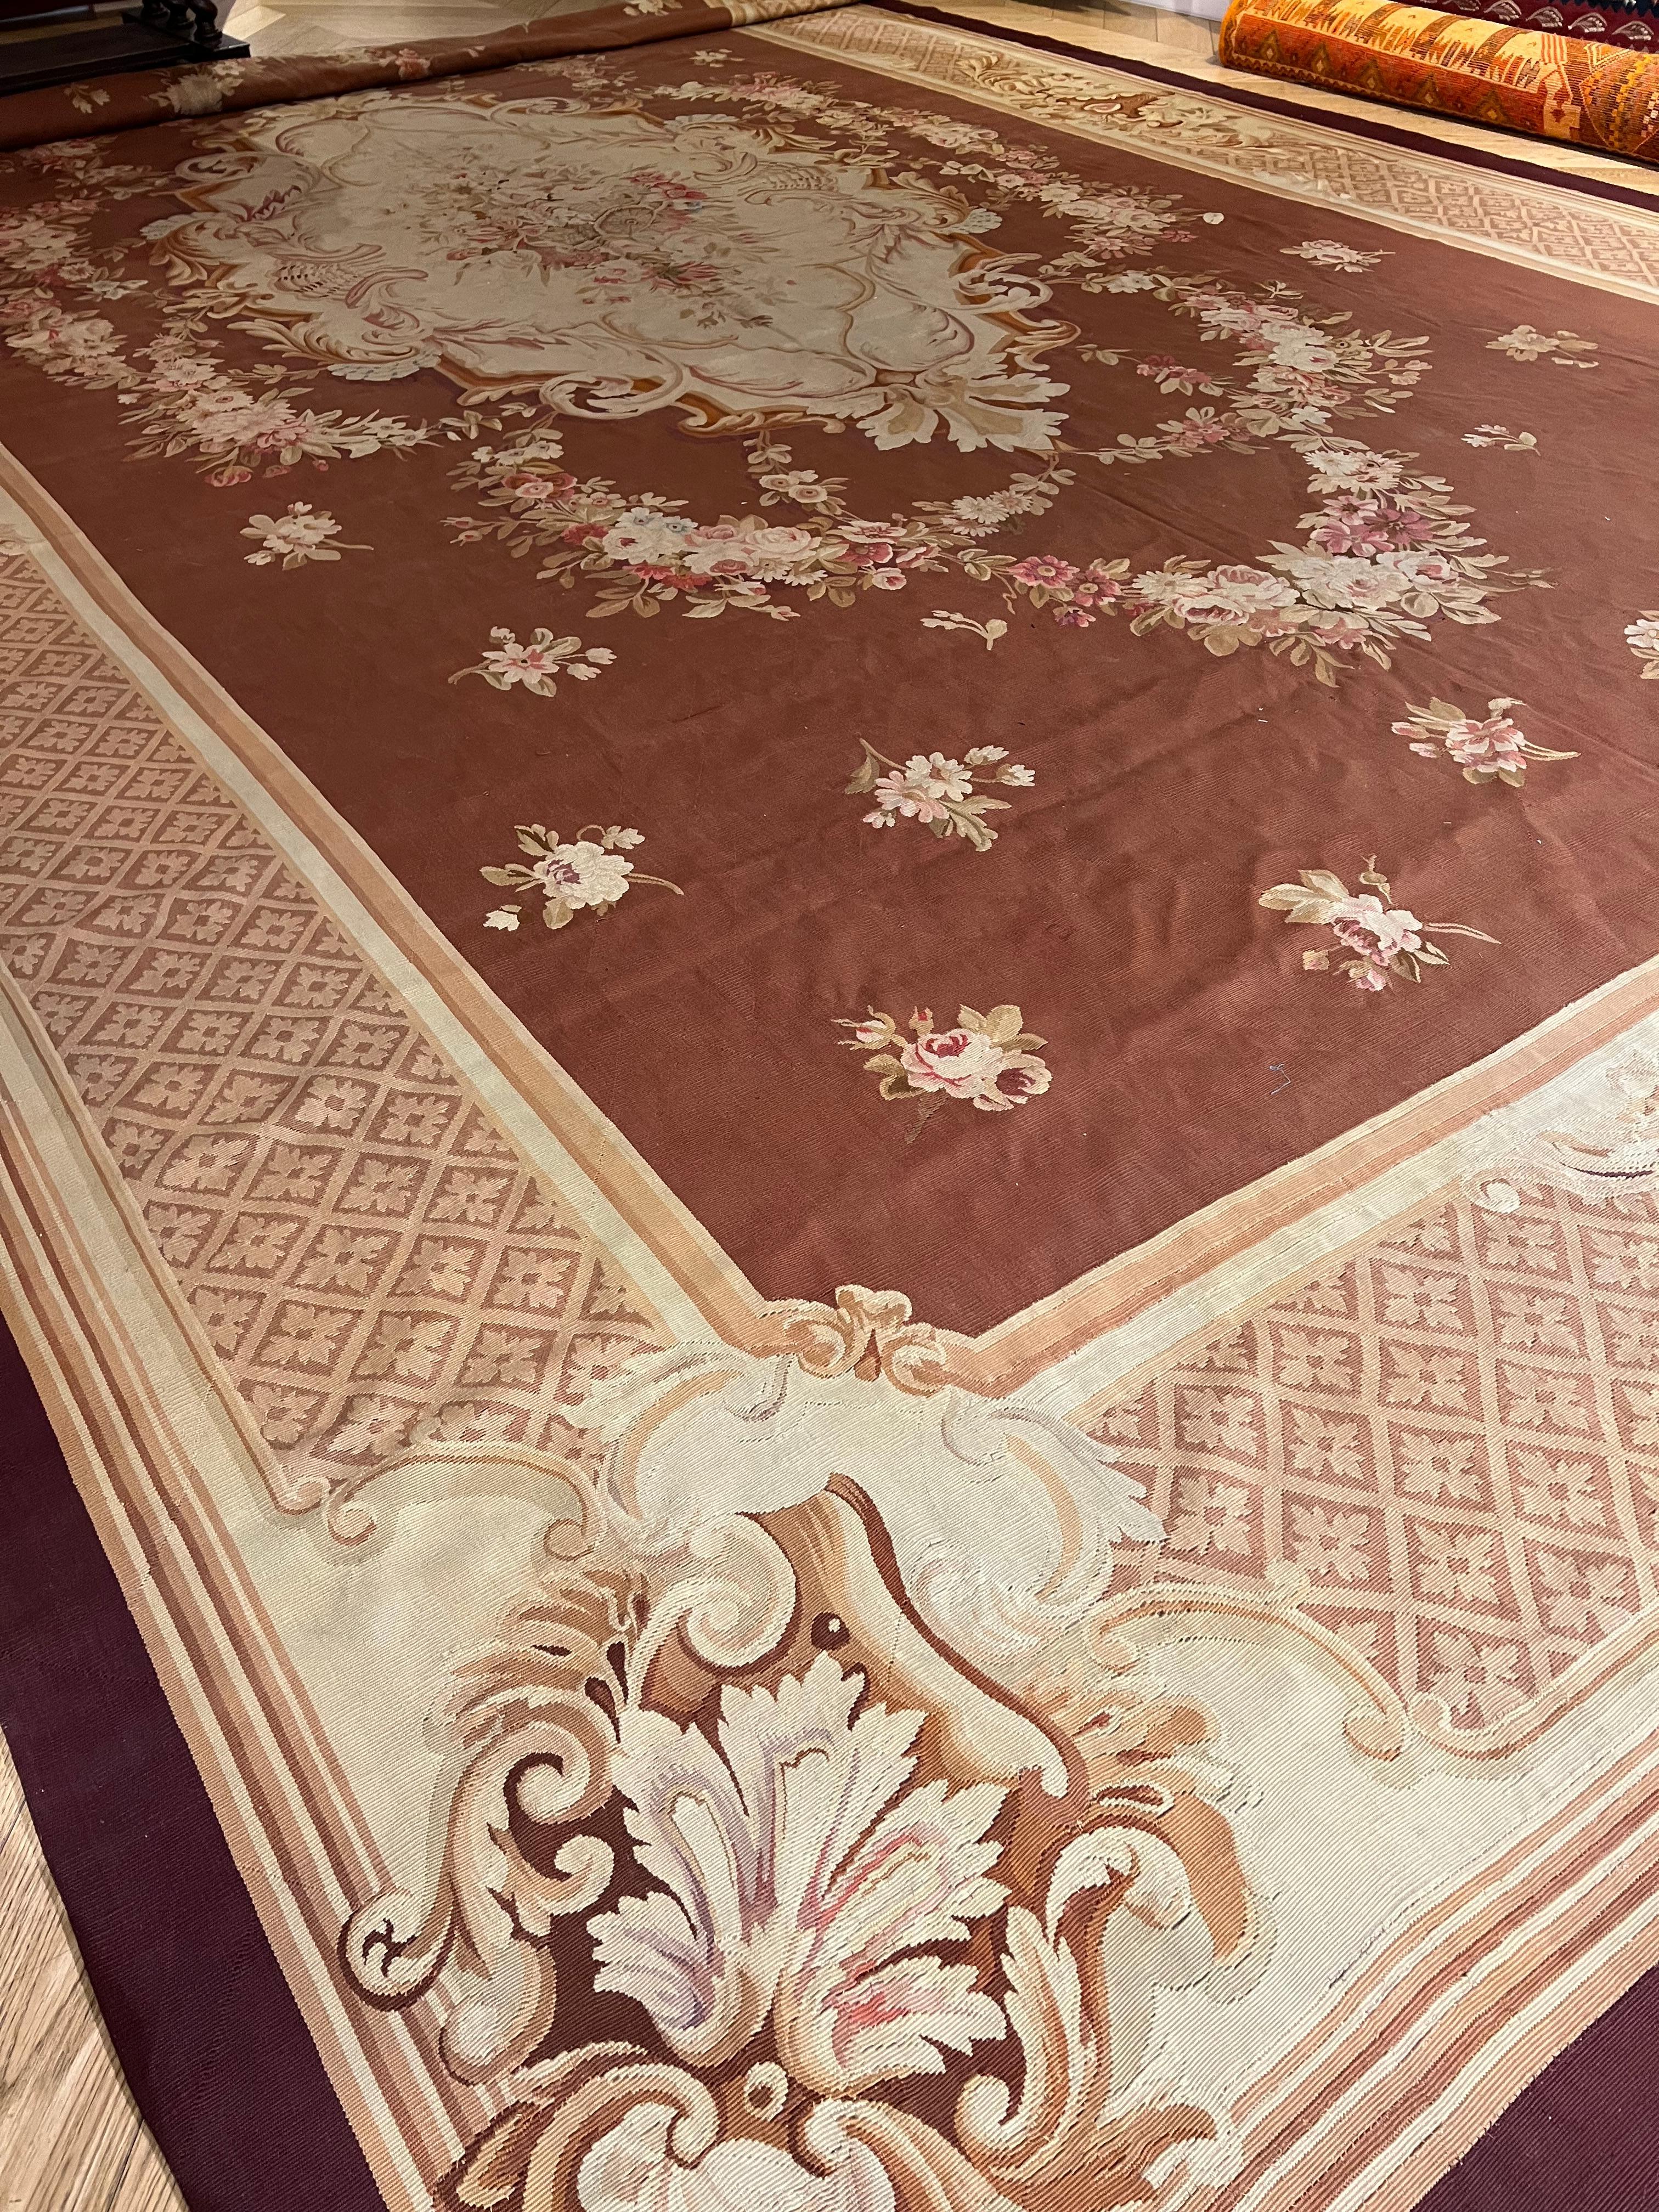 The French factory in Aubusson is famous both for the production of wall tapestries and for the weaving of beautiful floor rugs. Both of these textiles, always of high quality, were destined to complete the sumptuous furnishings of villas and